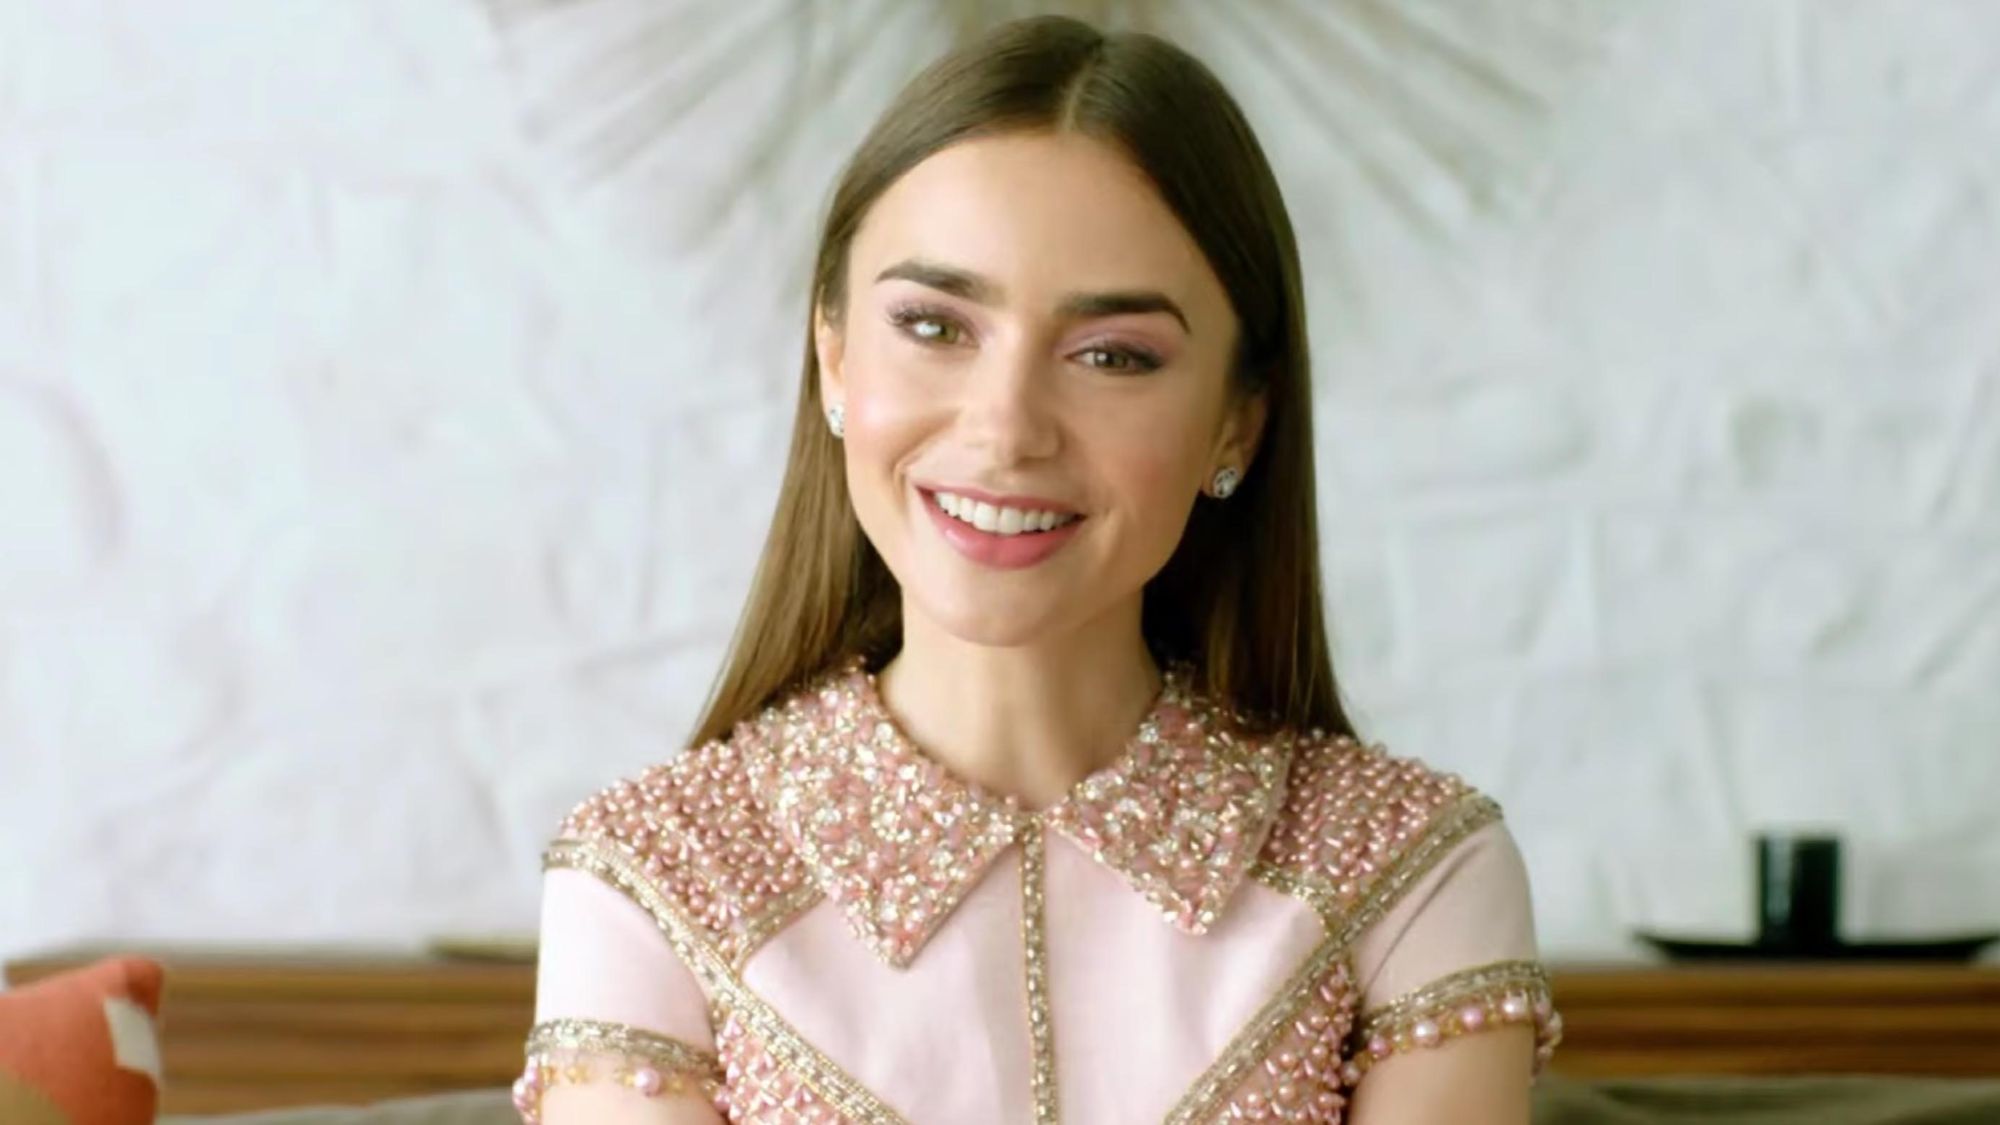 Want to know about celebrity under eye care secrets? This is the anti-fatigue weapon of Hollywood stars like Lily Collins.